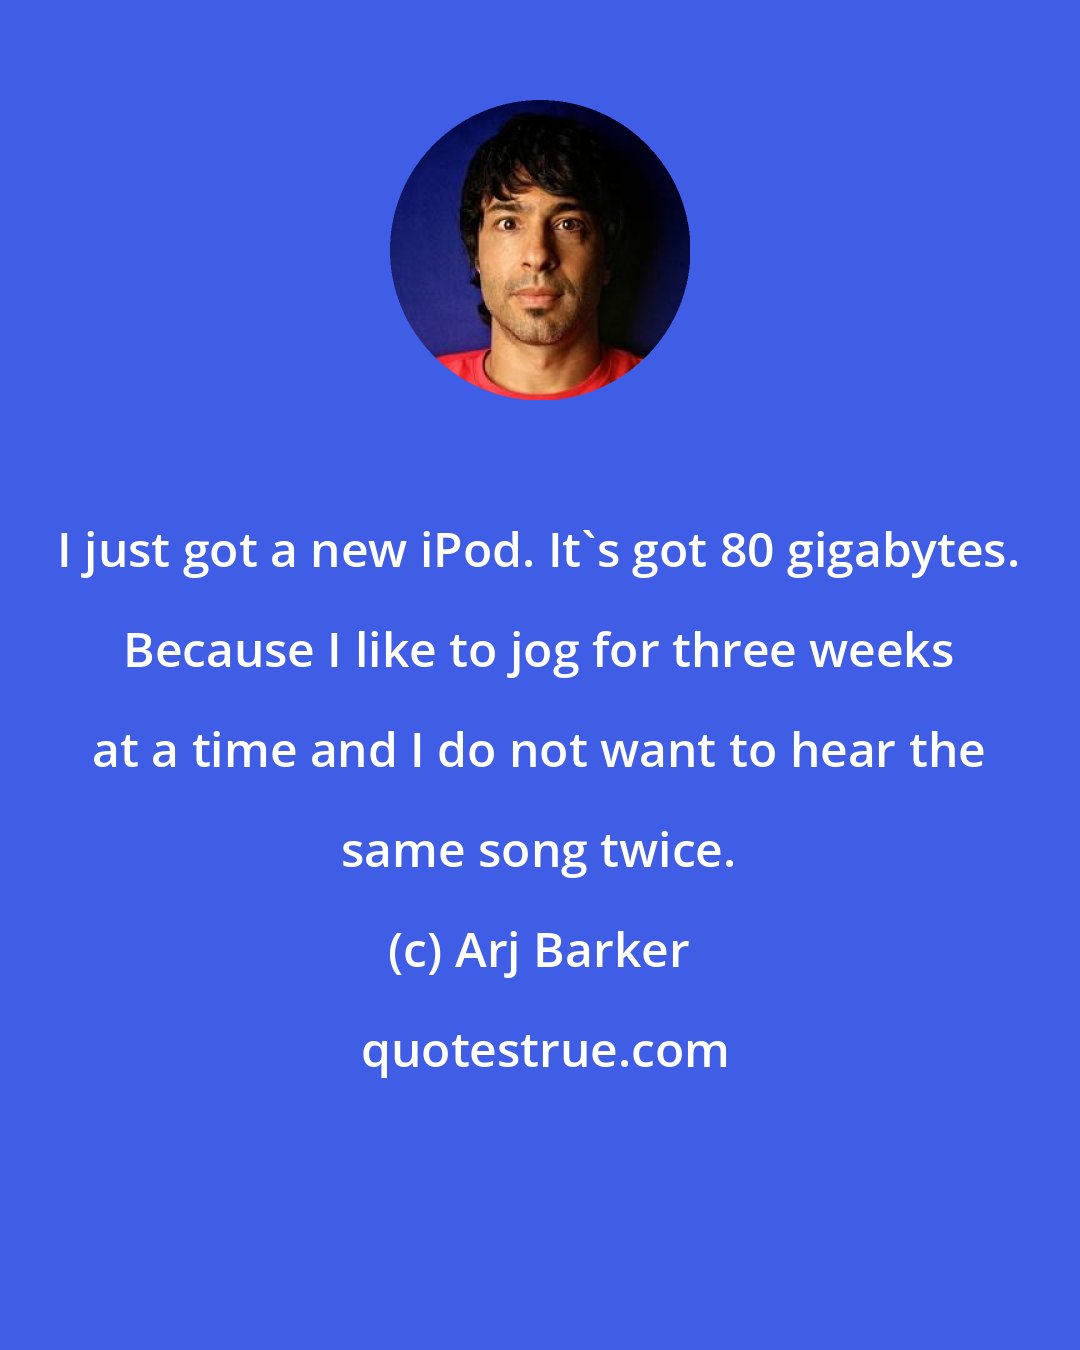 Arj Barker: I just got a new iPod. It's got 80 gigabytes. Because I like to jog for three weeks at a time and I do not want to hear the same song twice.